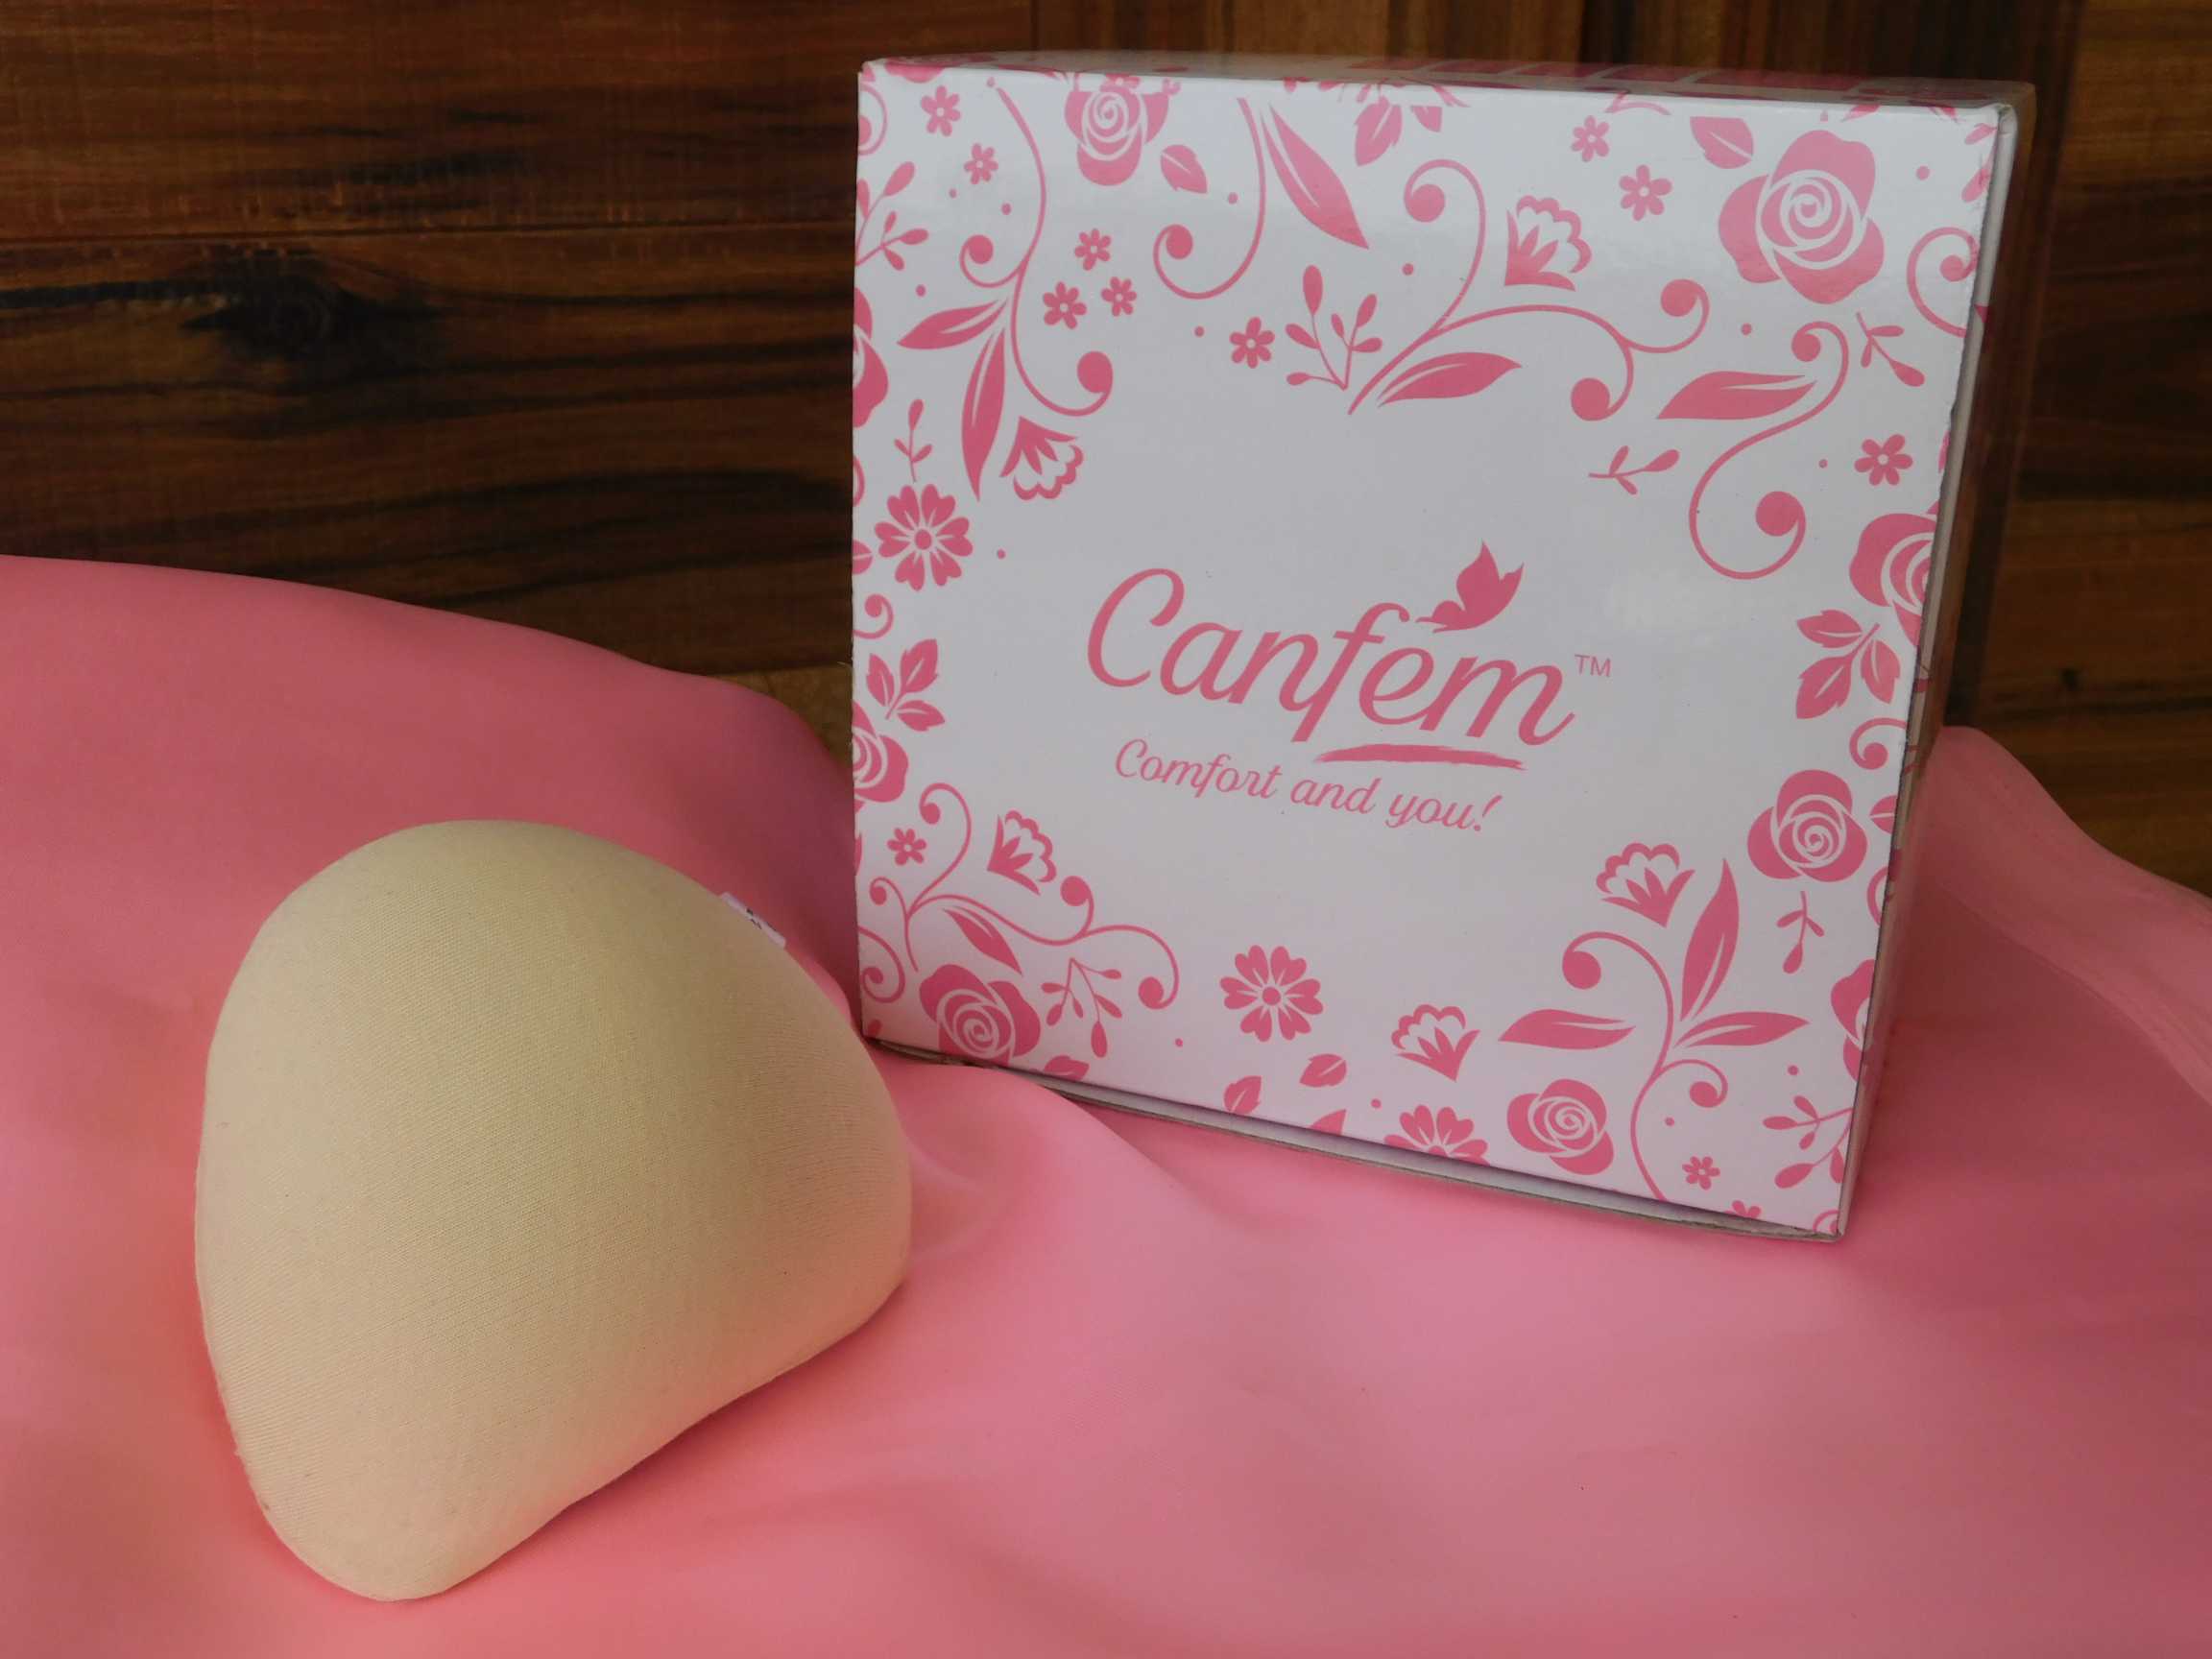 A breast prosthesis made by Canfem 